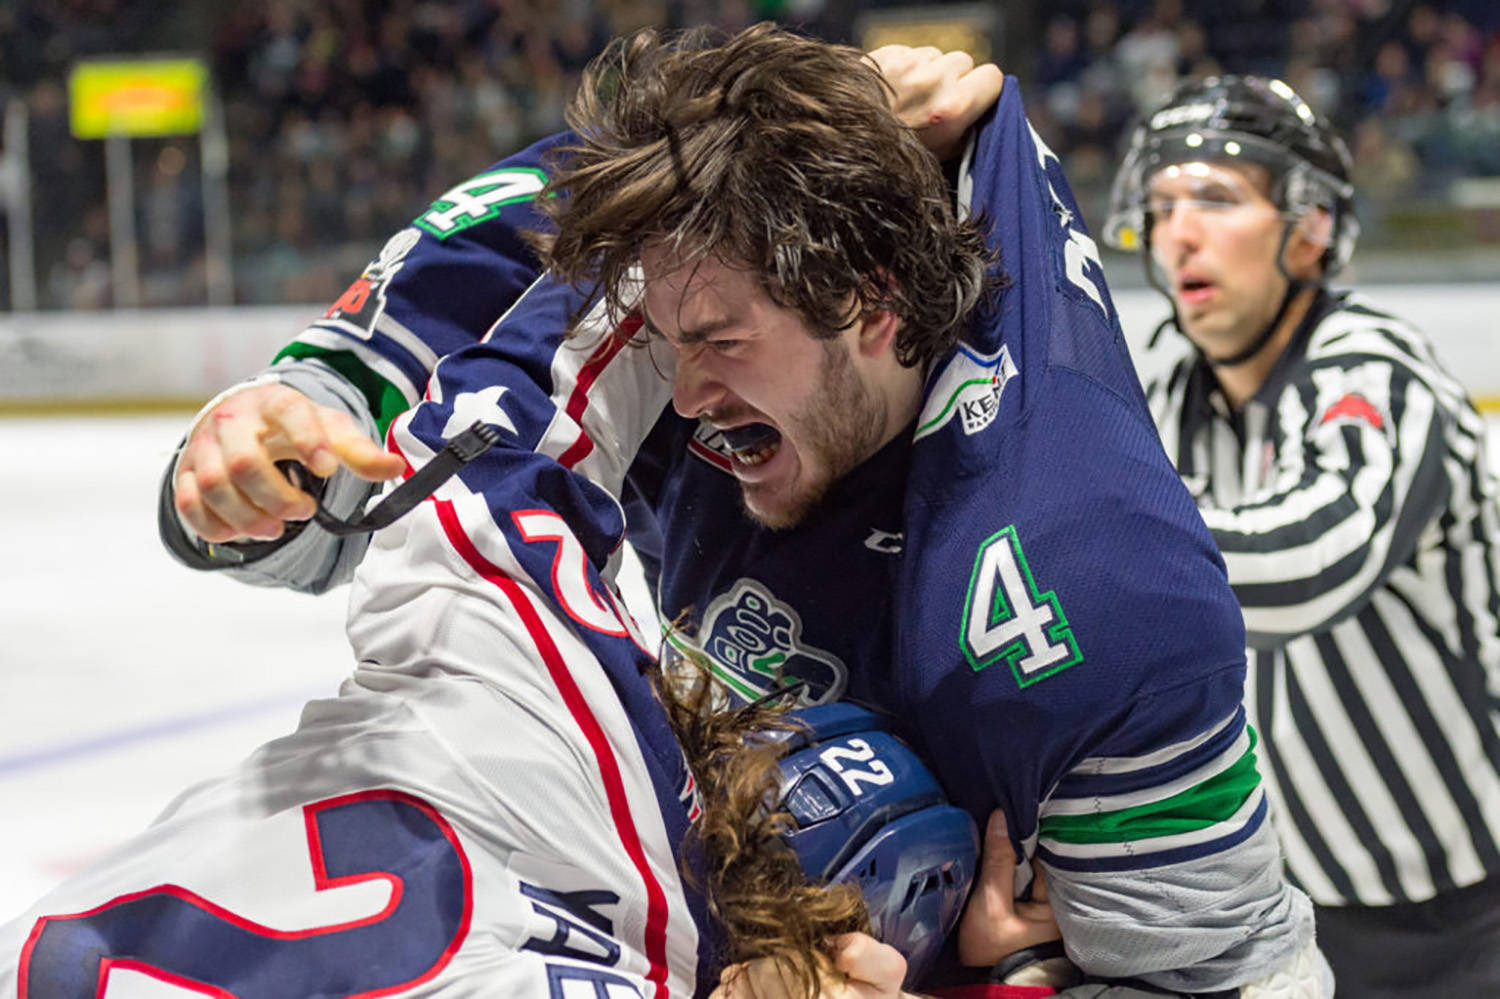 Thunderbirds enforcer Turner Ottenbreit scuffles with the Americans’ Nolan Yaremko during WHL play Friday night at the accesso ShoWare Center. COURTESY PHOTO, Brian Liesse/T-Birds